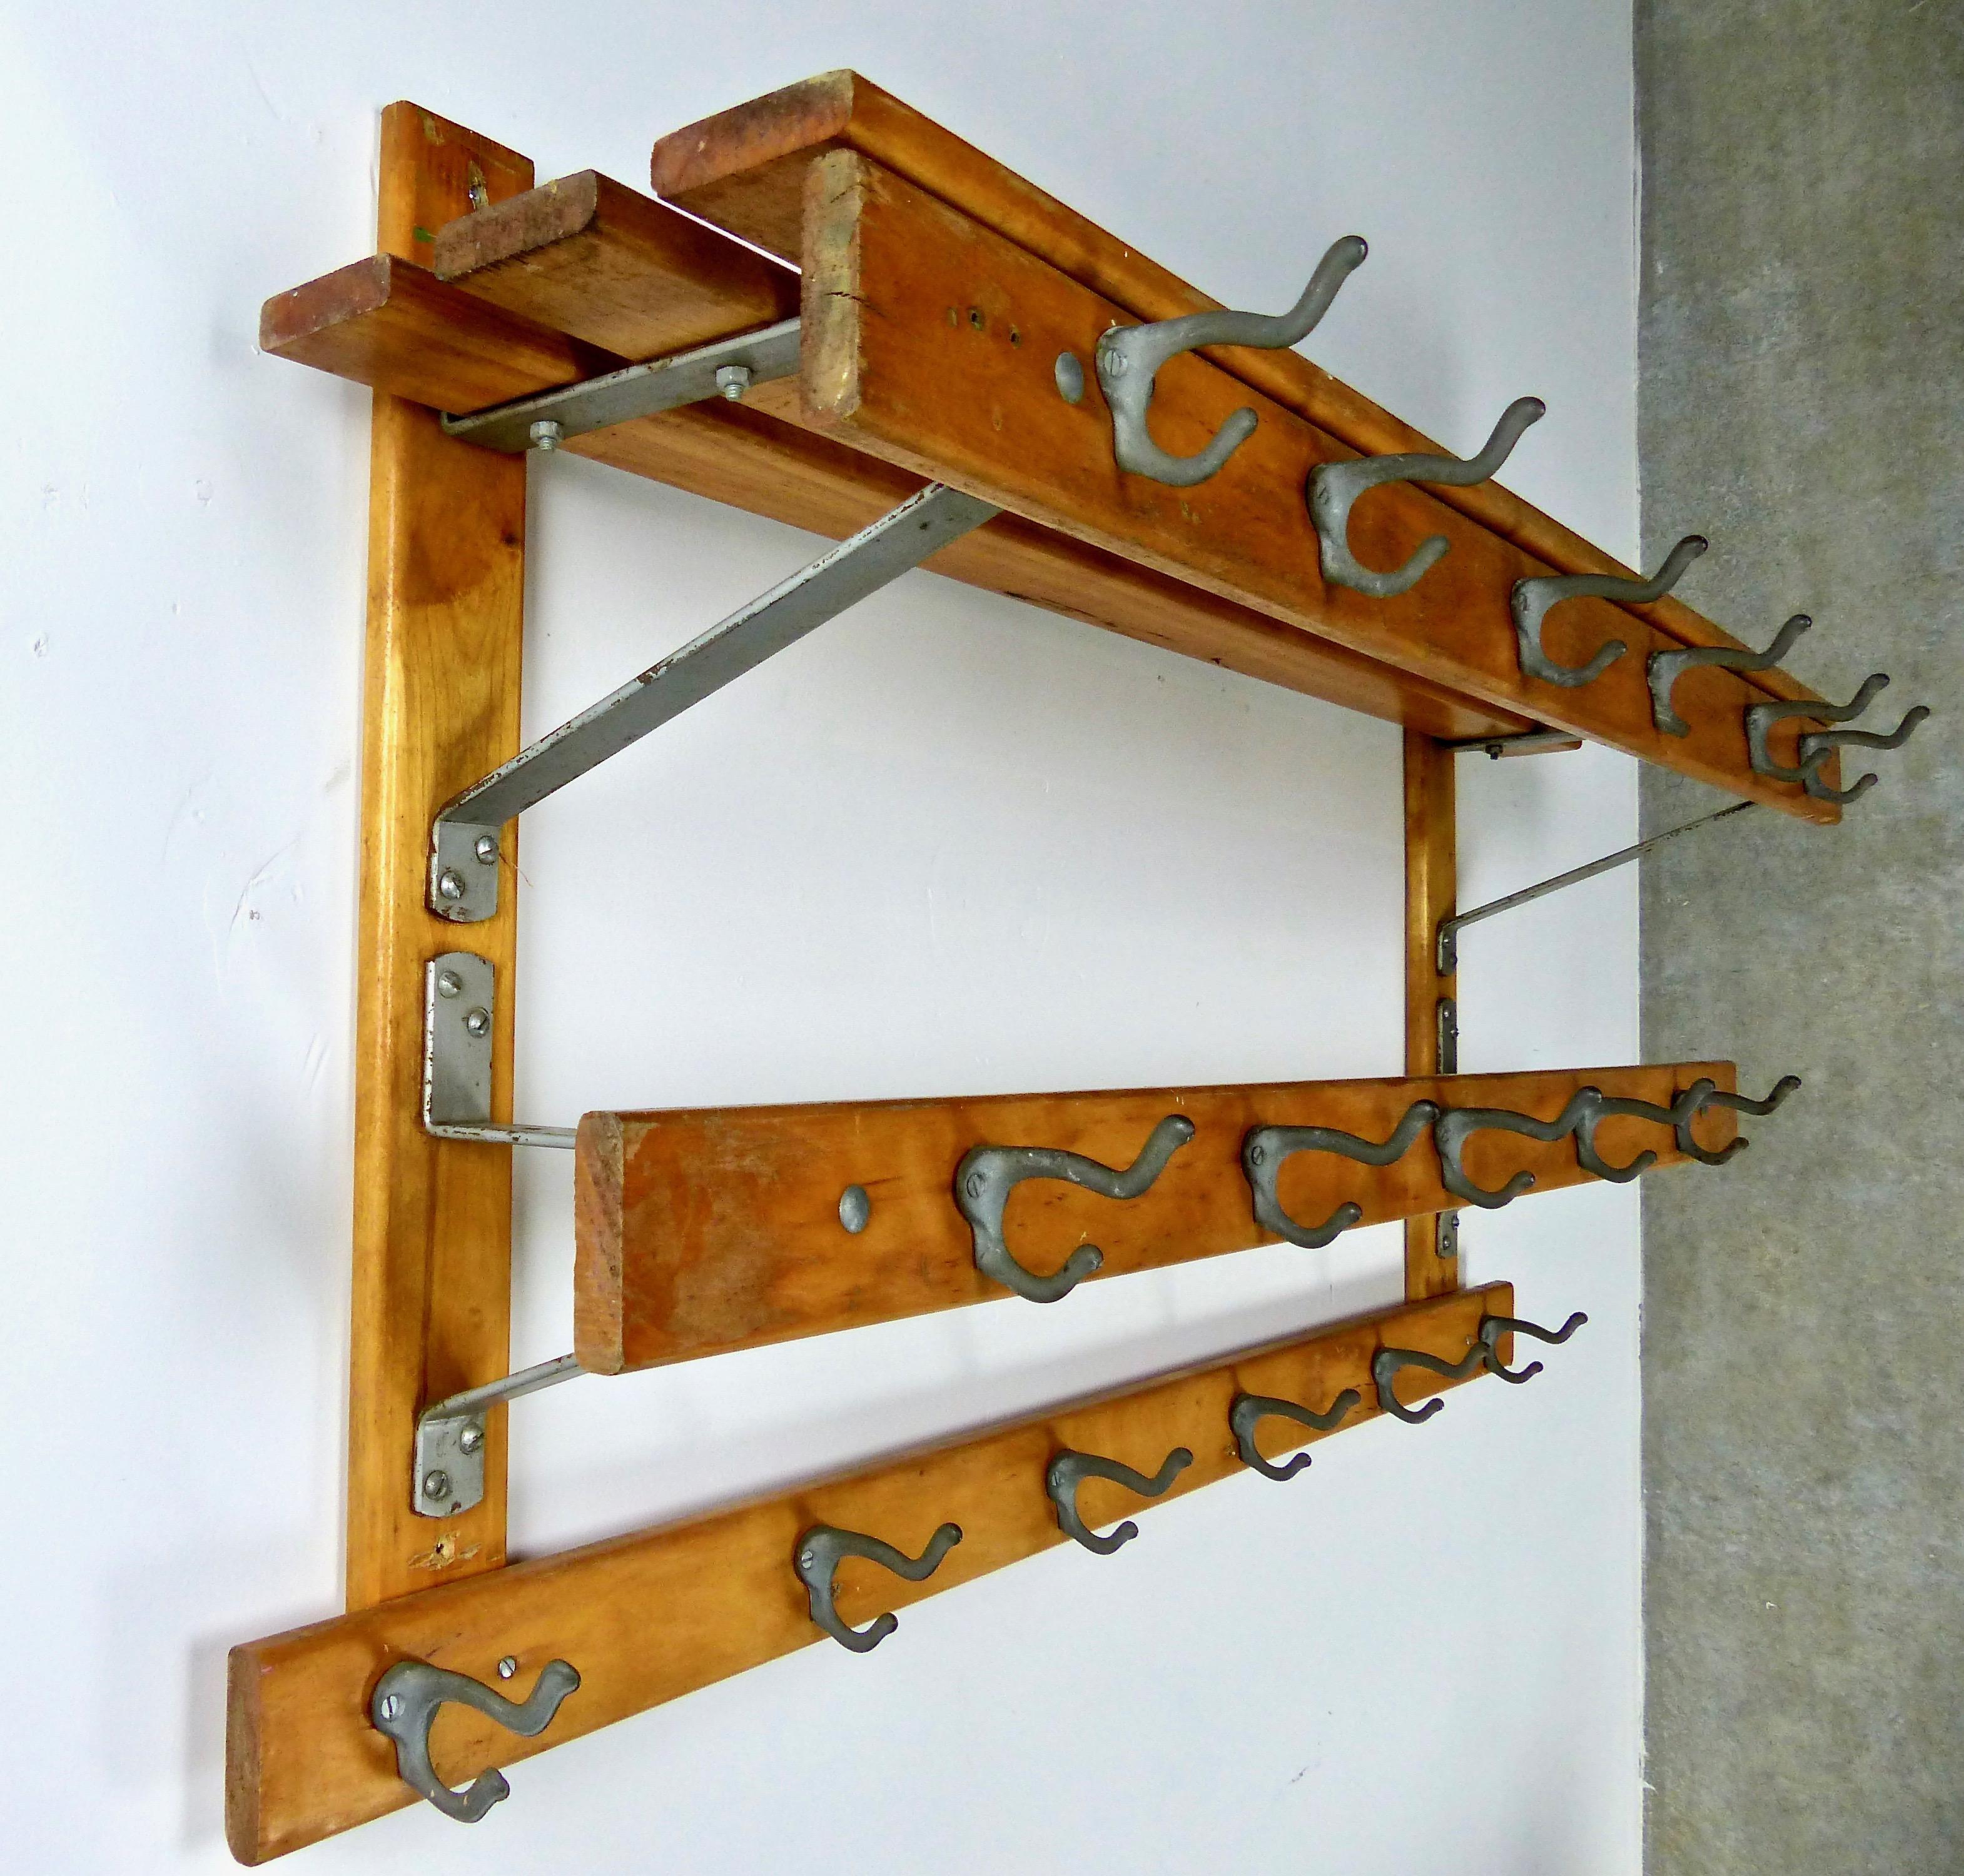 Well-built and sturdy oak hall rack with both slat shelves and original metal hooks.
 Excellent authentic storage unit for a country entryway, mudroom etc. 
Salvaged from a school in Upper NY.